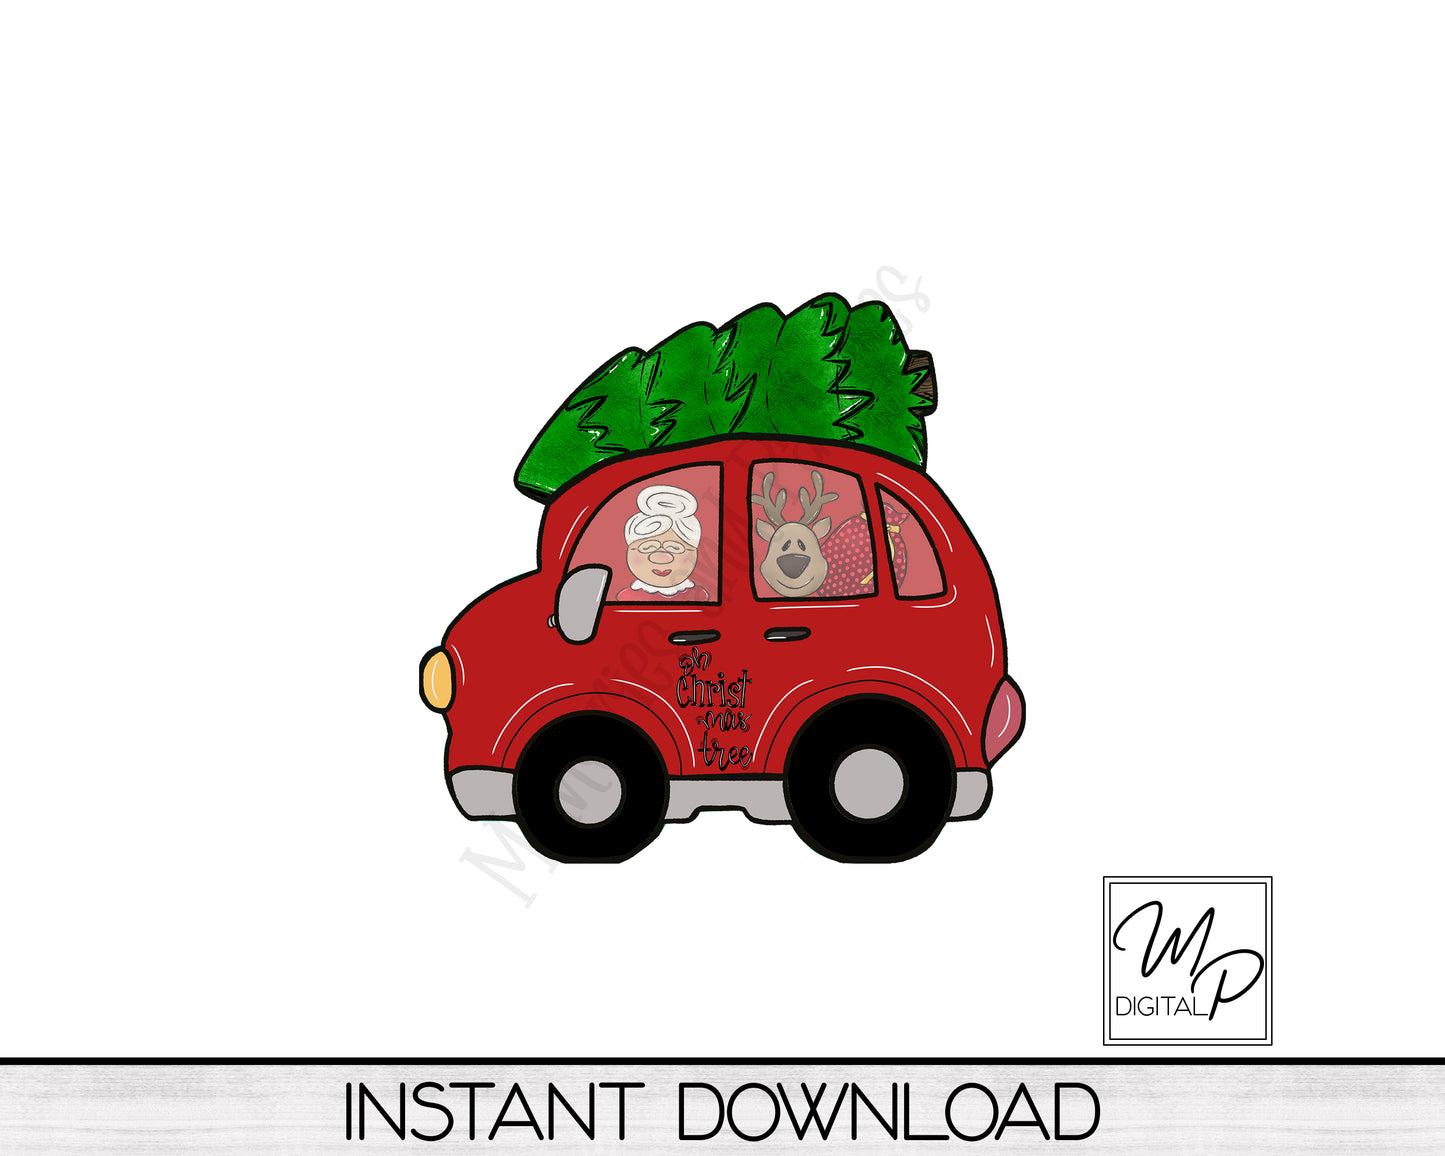 Whimsical Car with Christmas Tree Sublimation Design for Christmas Ornaments - Digital Download